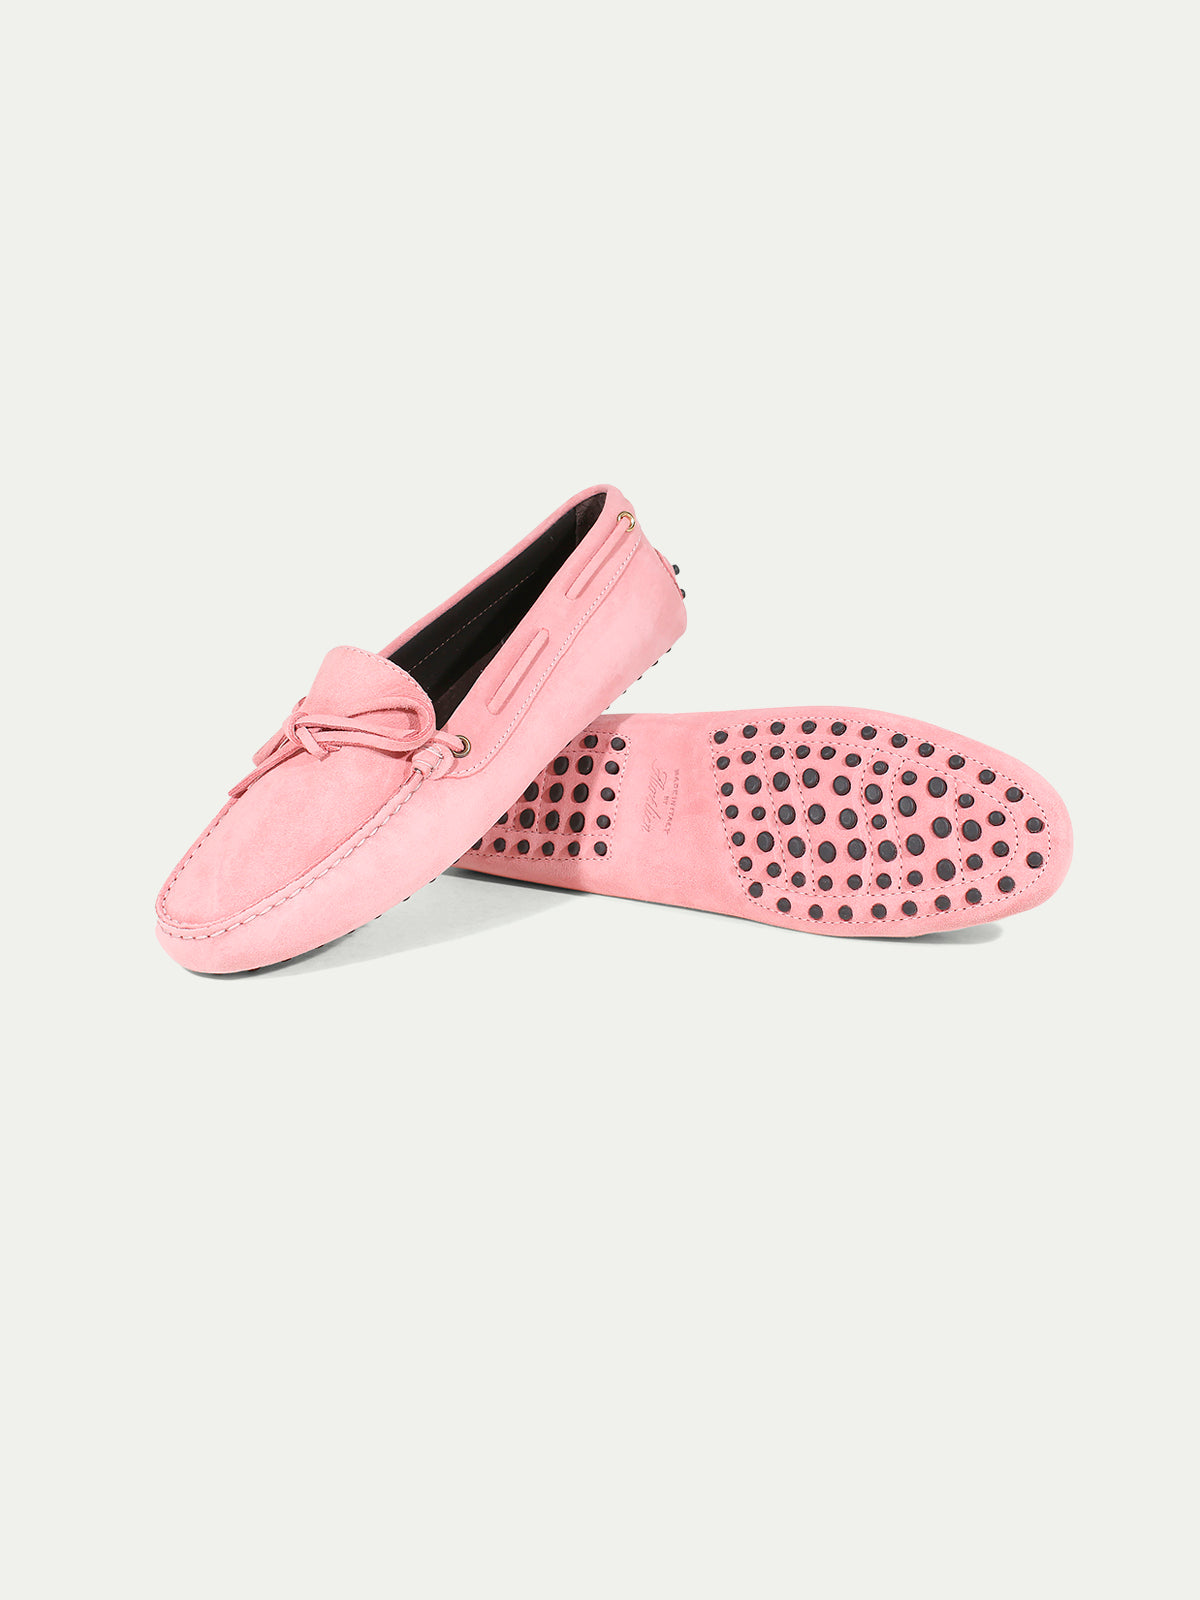 Louis Vuitton Shoe Pink Raspberry Suede Loafer / Driving Shoe 38.5